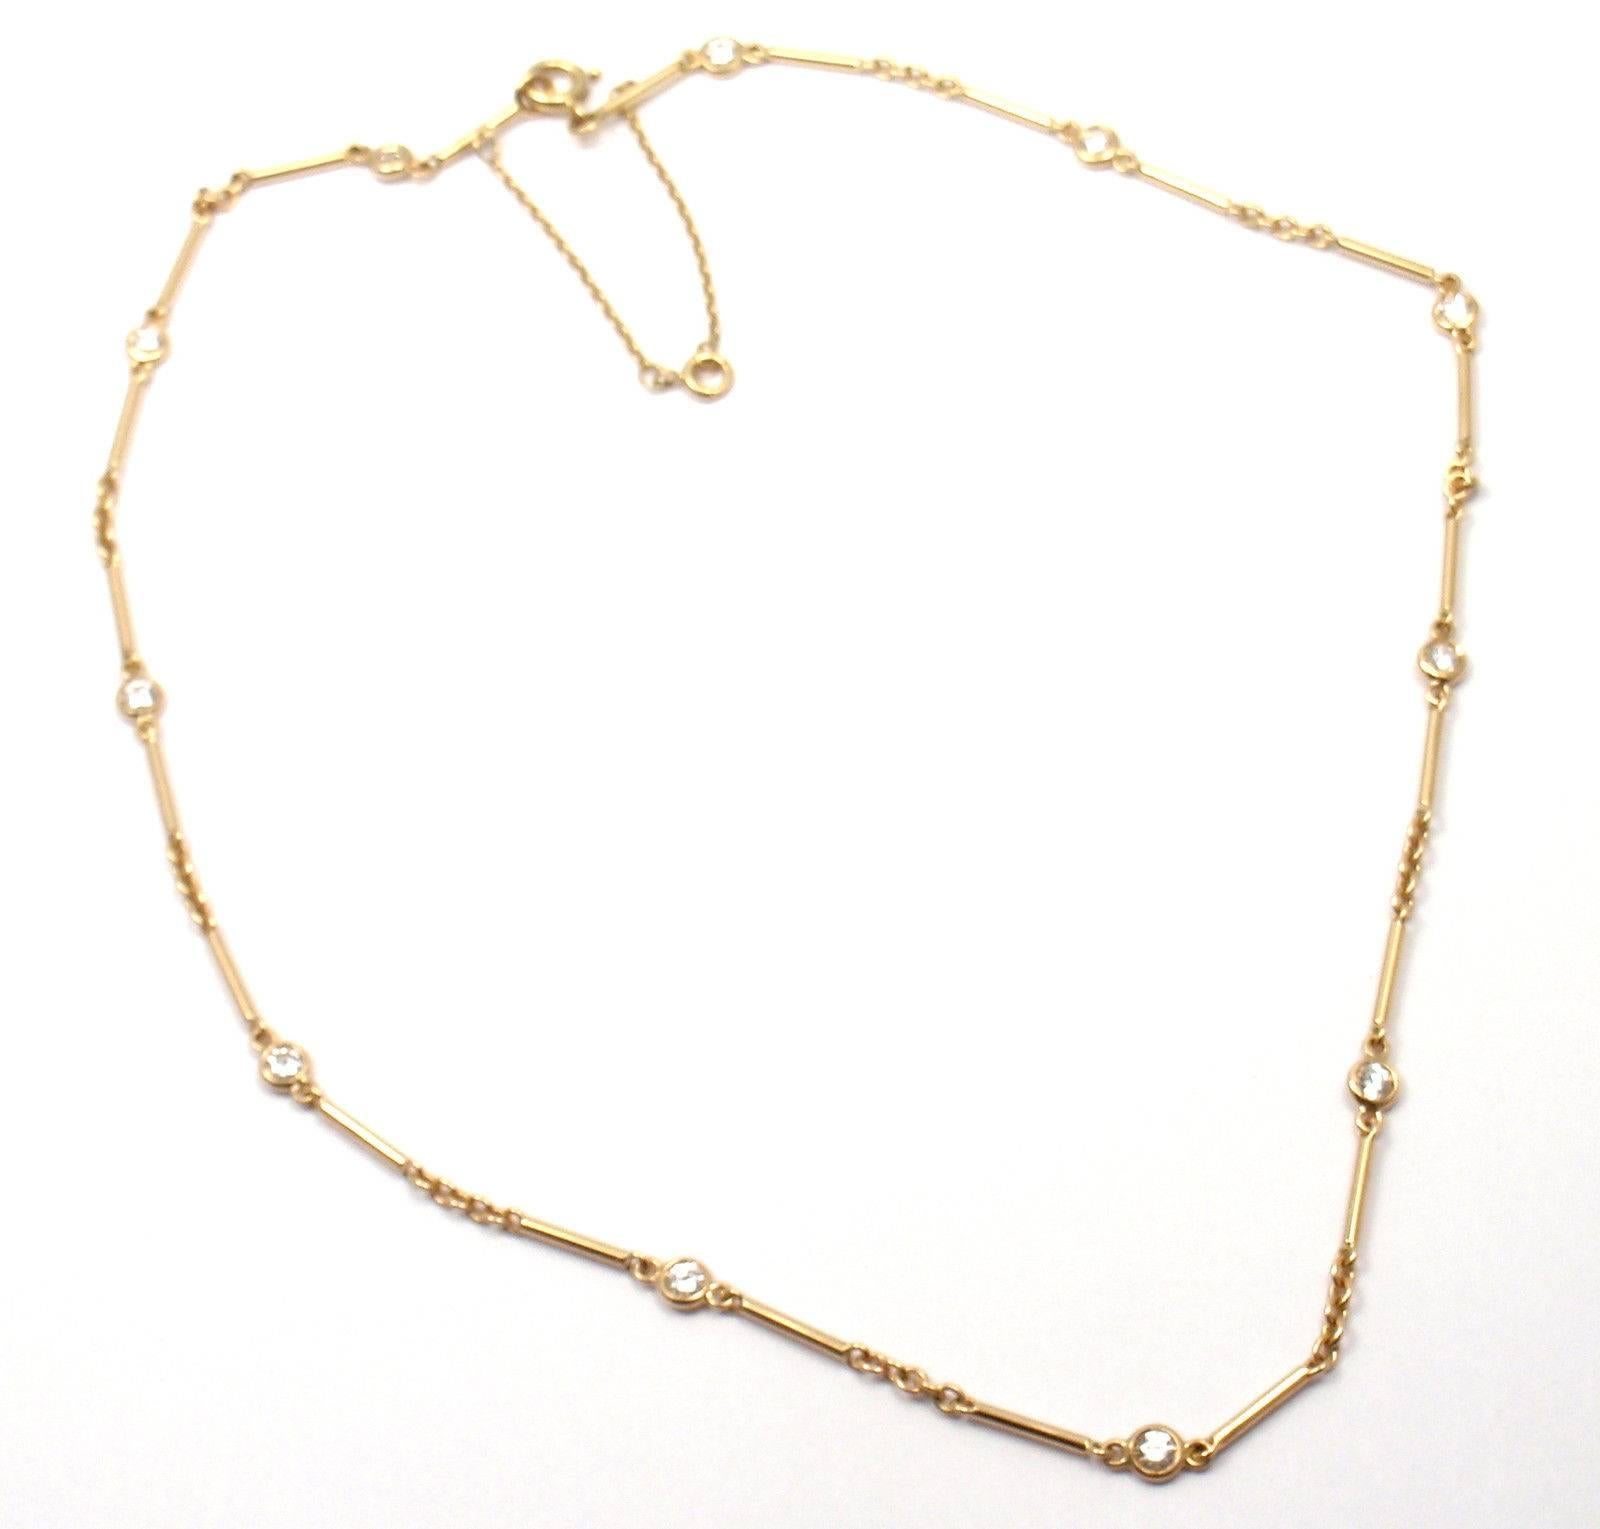 Women's or Men's Cartier Diamond By The Yard Choker Yellow Gold Necklace